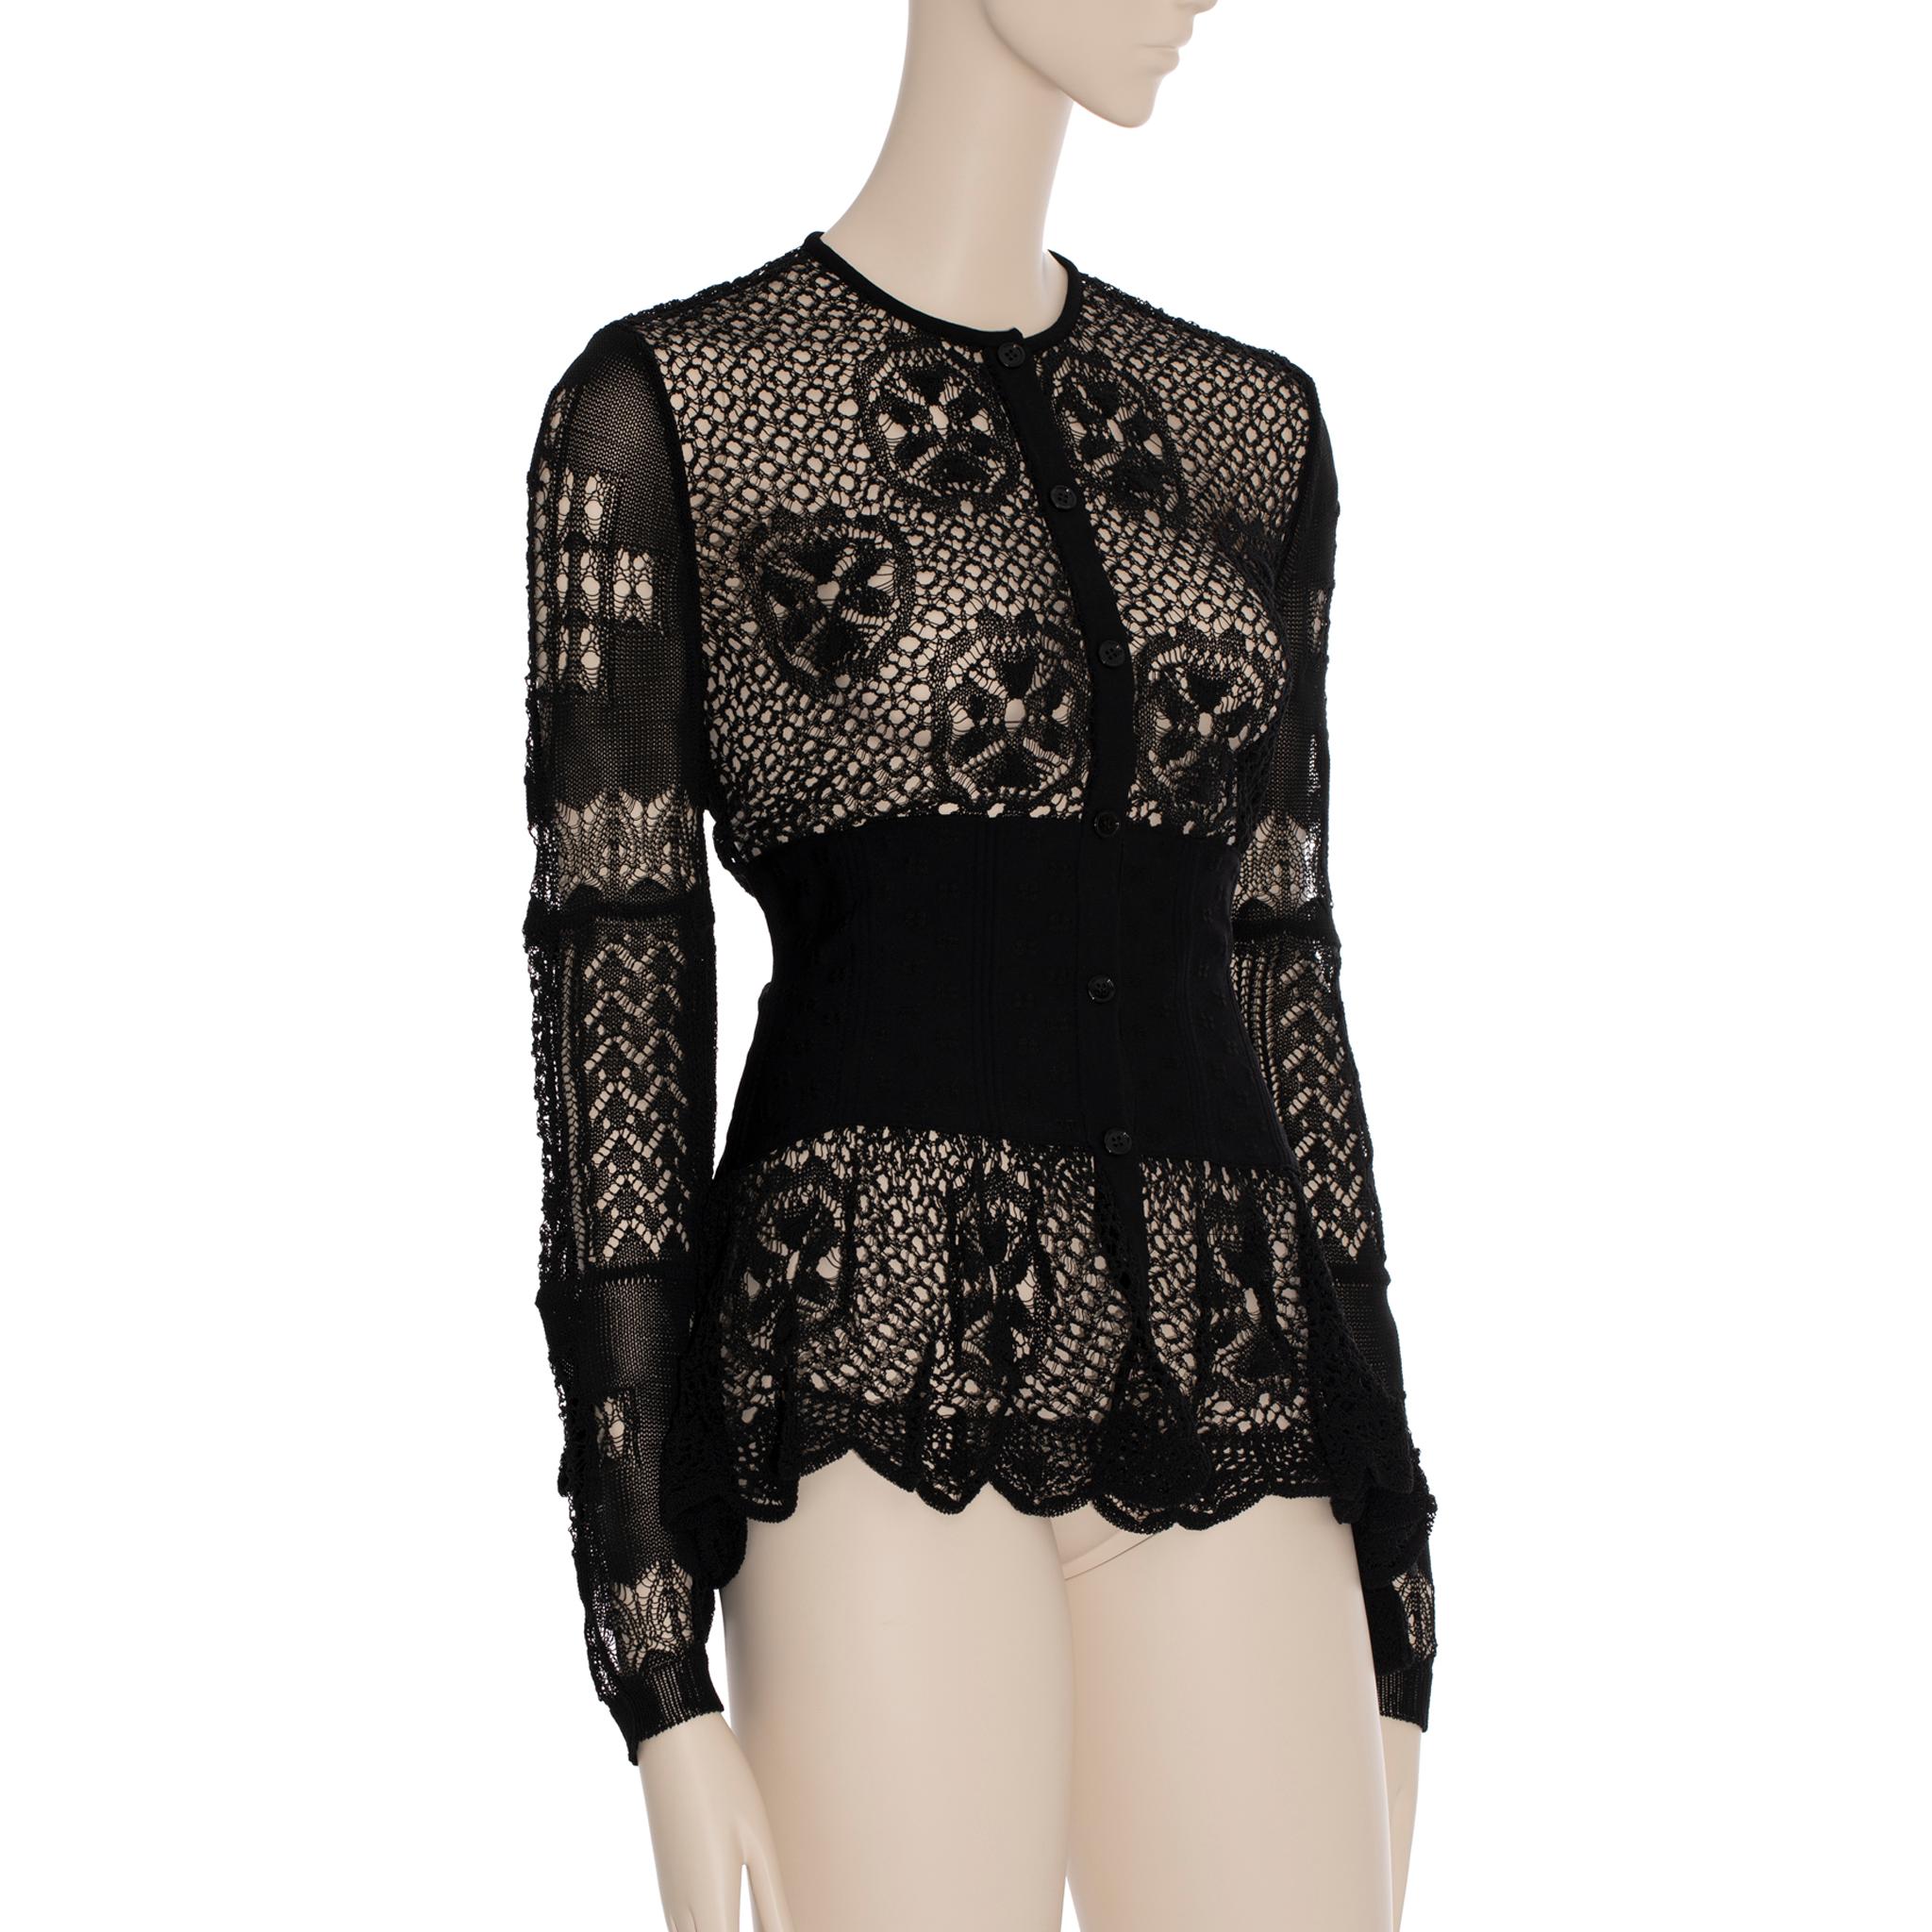 Brand: Alexander McQueen

Product: Patchwork Lace Peplum Cardigan

Size: Small

Sleeve: 63 Cm | Length: 60 Cm | Bust: 80 Cm | Waist: 64 Cm

Colour: Black

Material 65% Cotton, 35% Polyamide

Condition: Pristine

The product is in pristine condition,